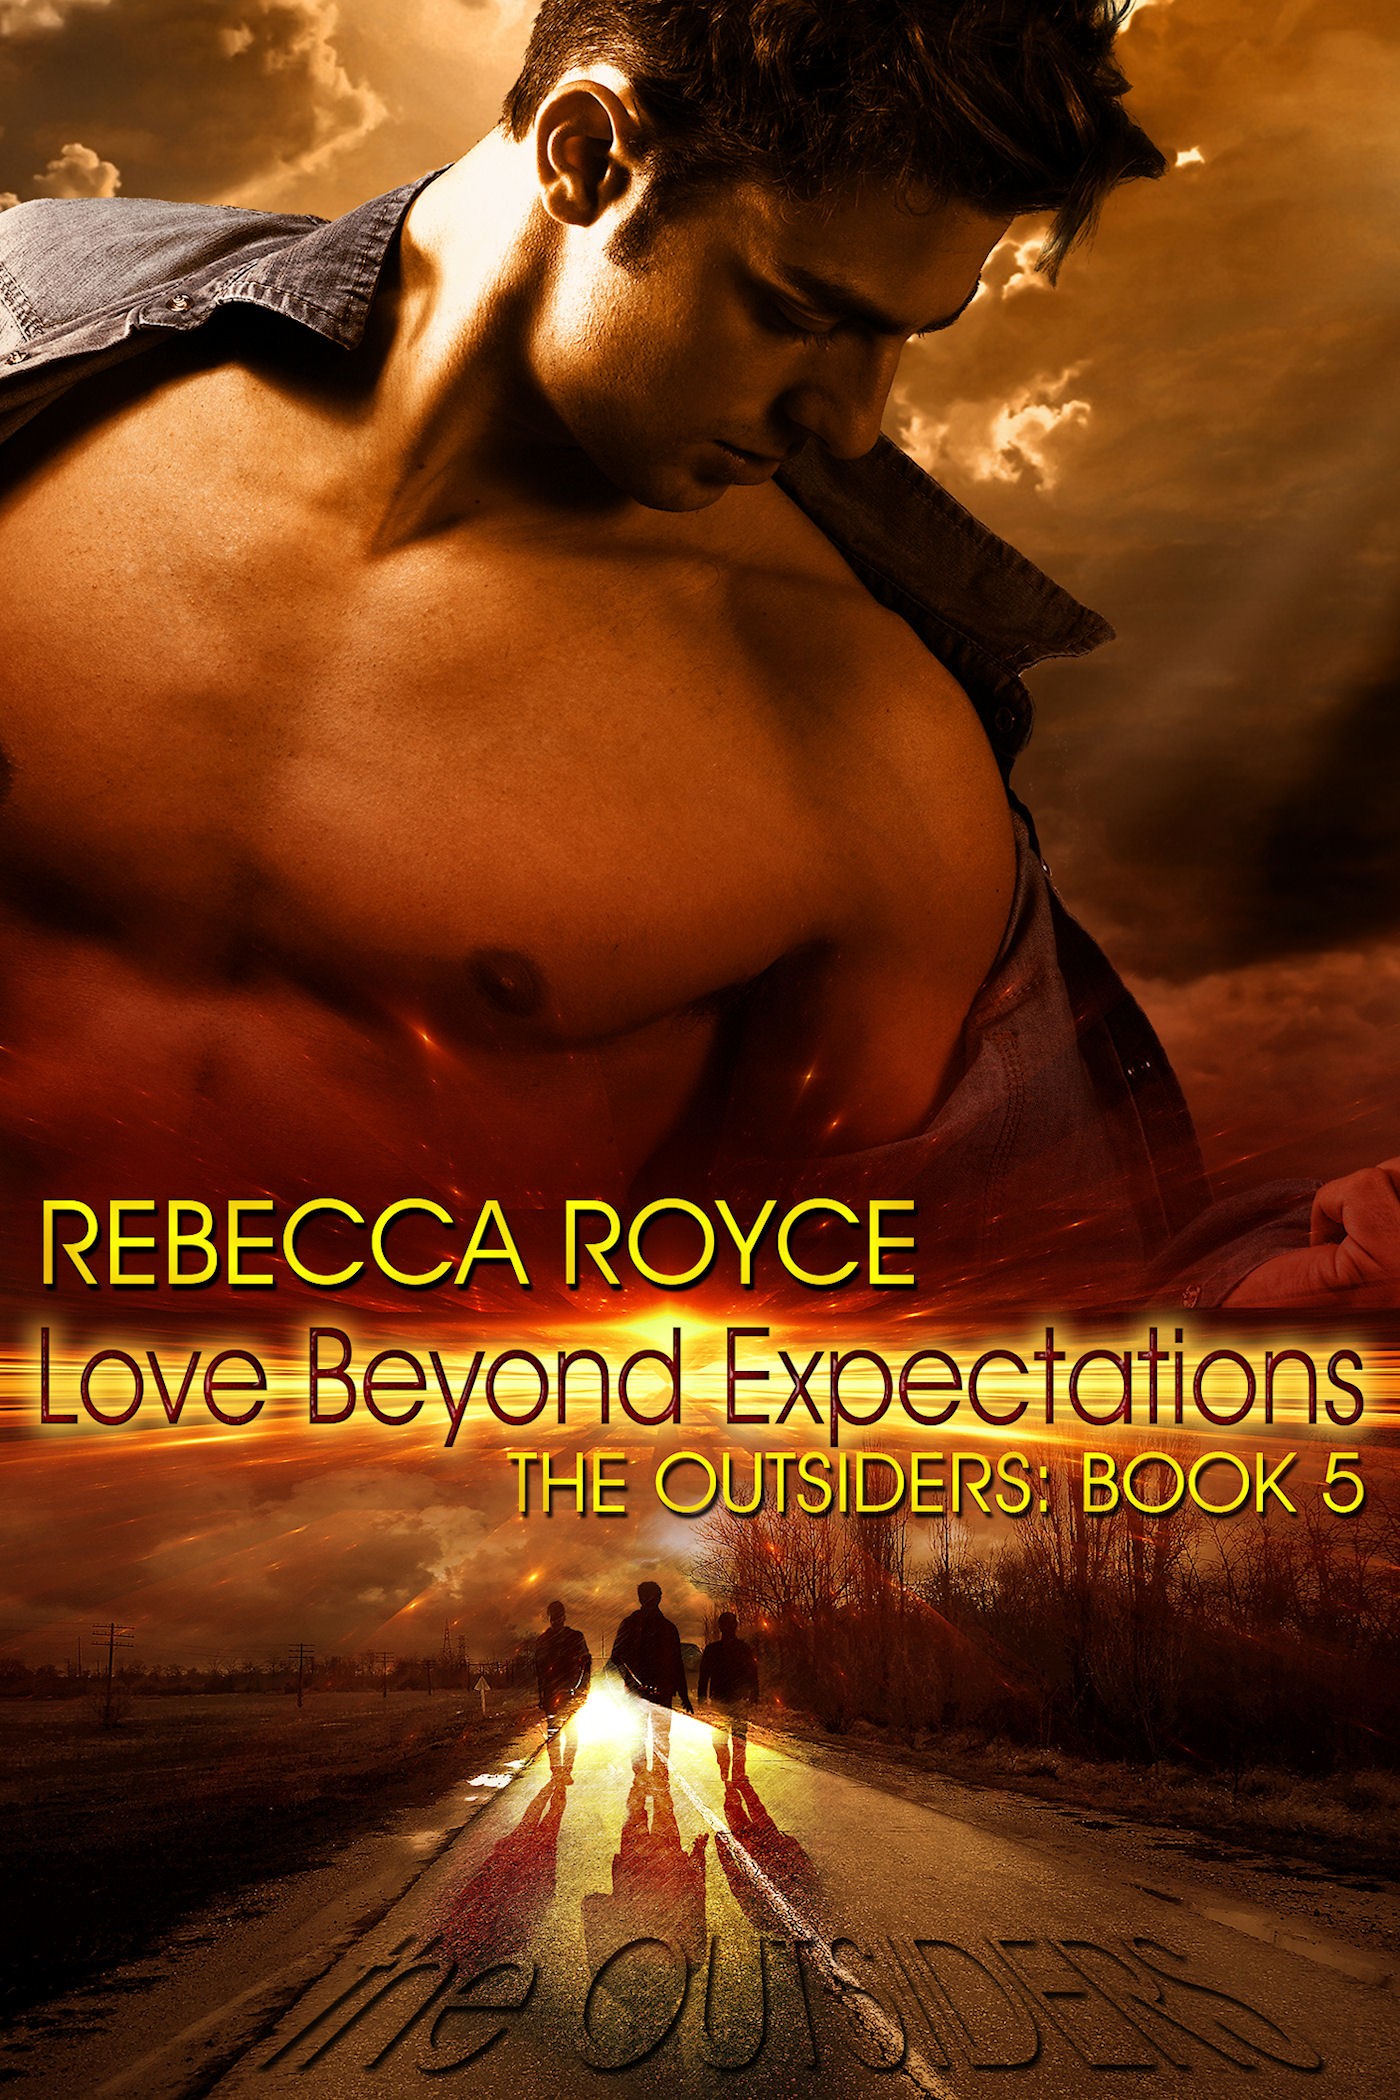 Love Beyond Expectations by Rebecca Royce